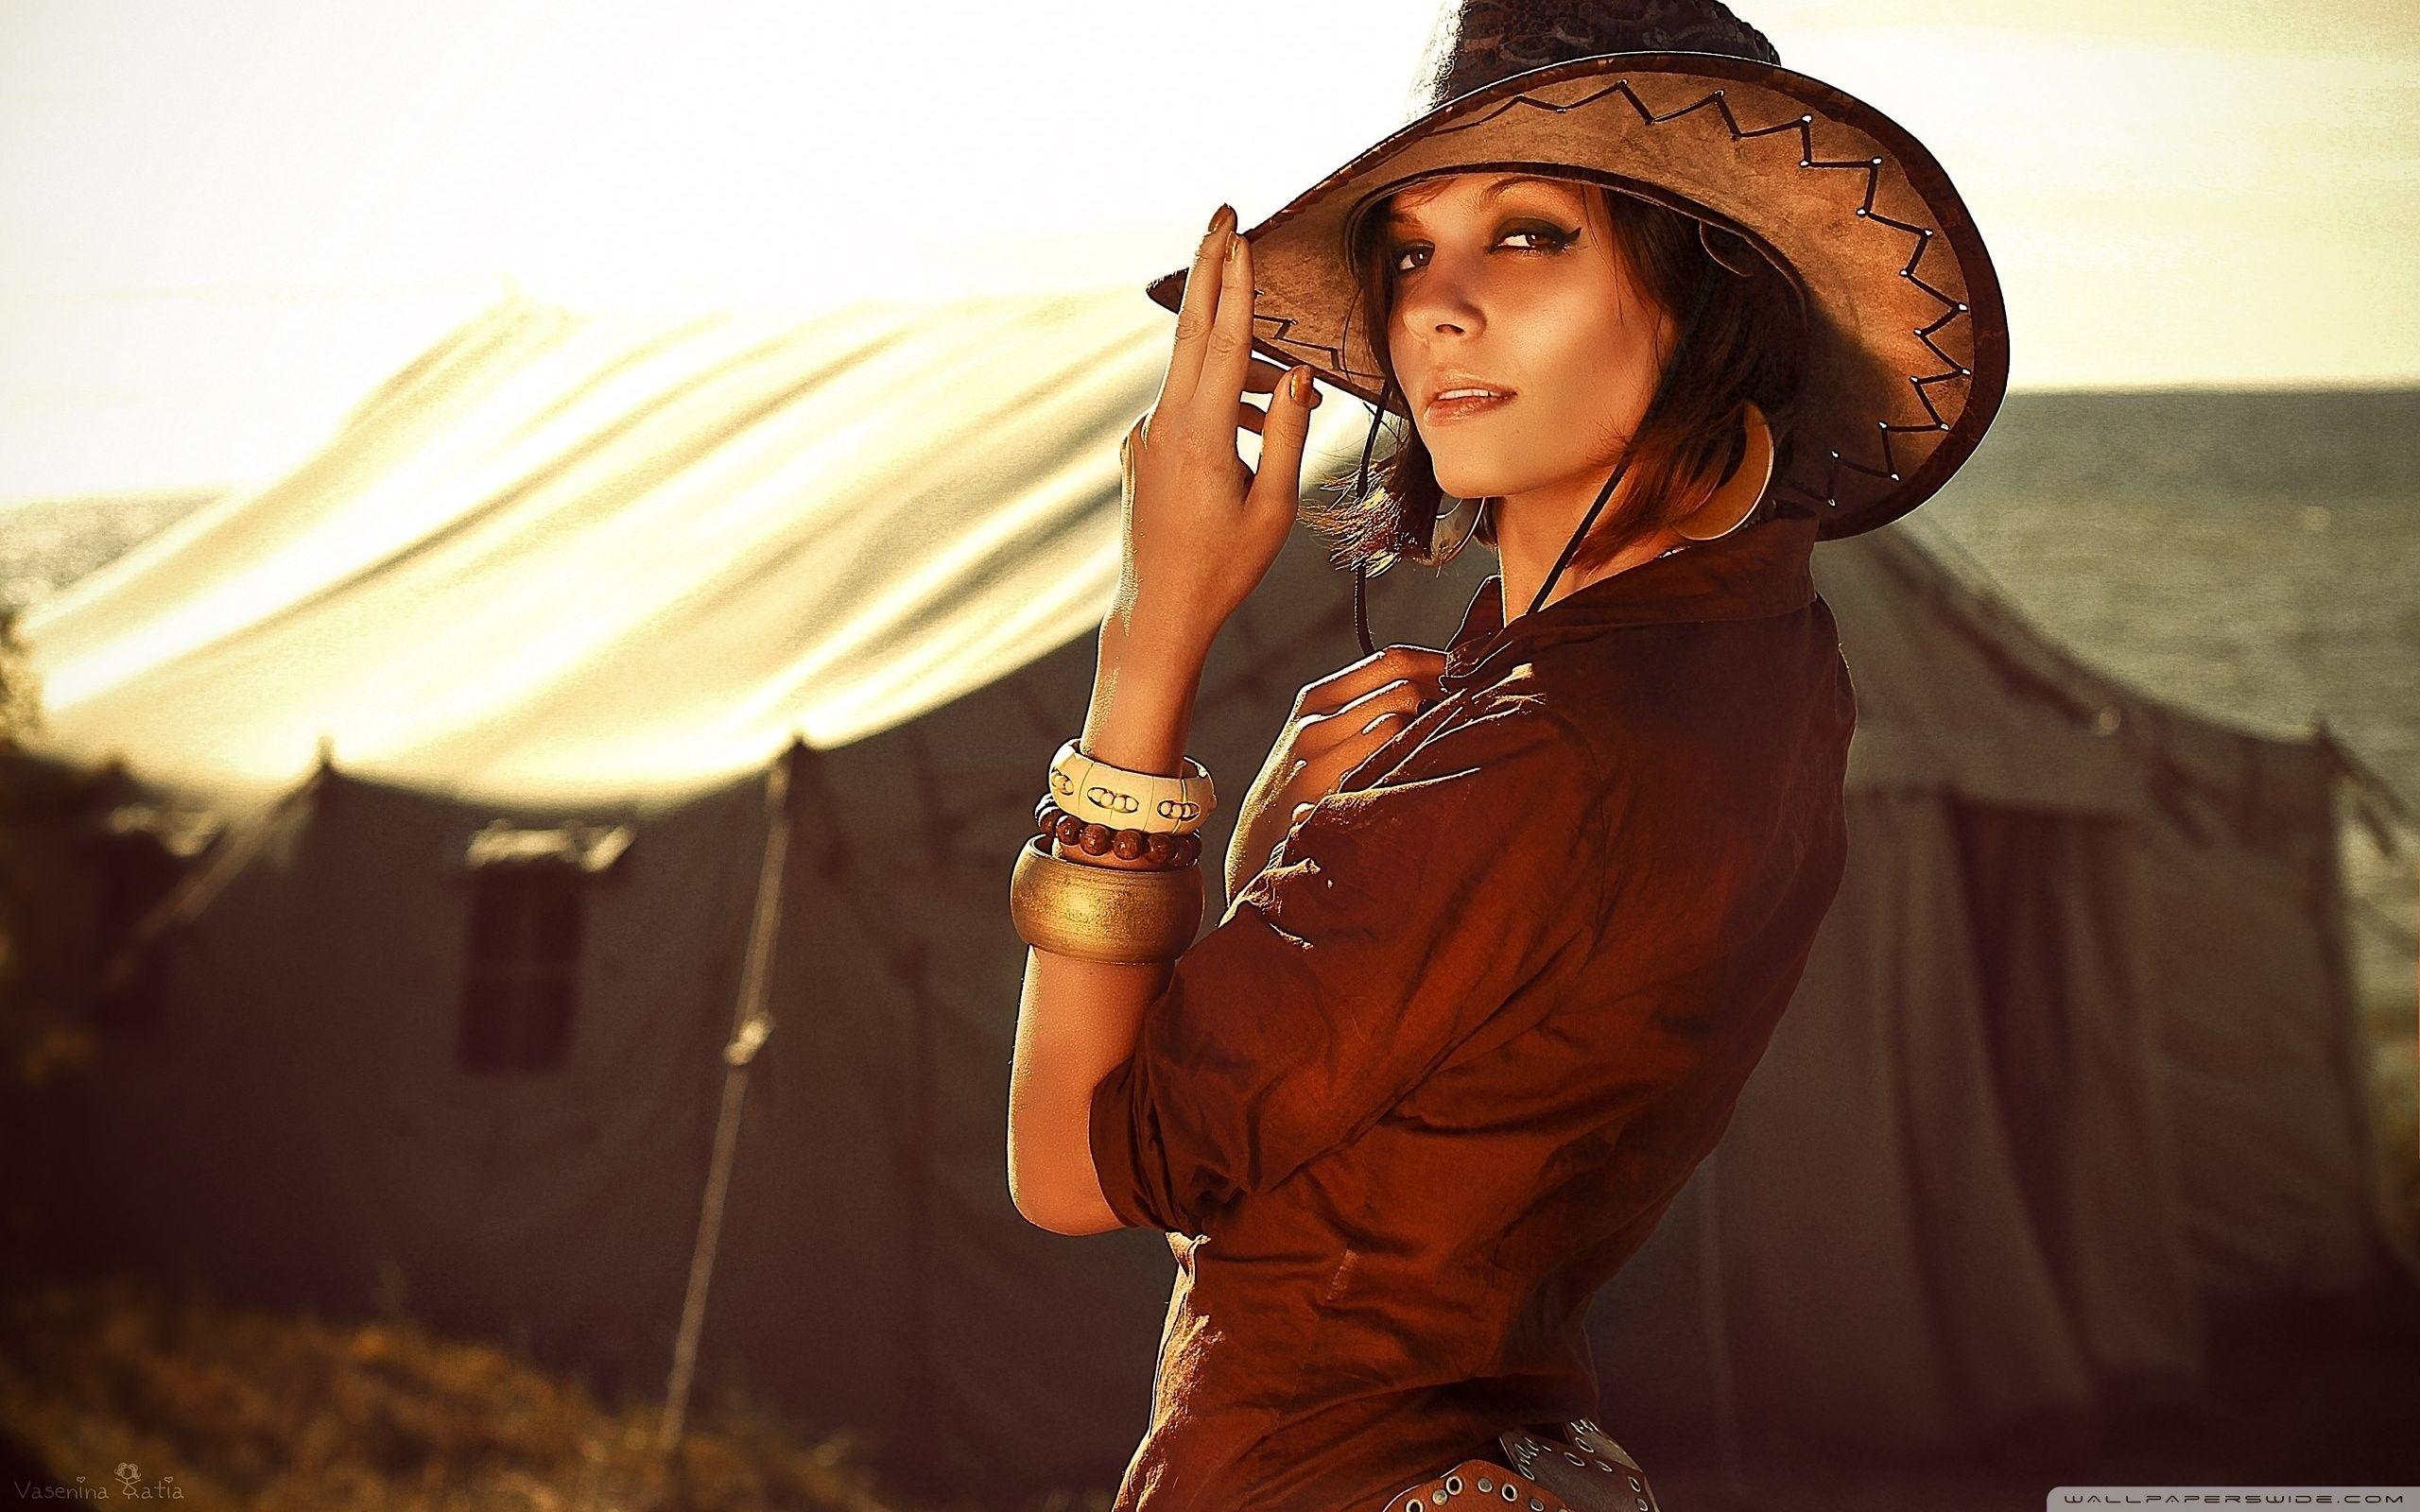 Cowboy Hat Laying On Top Of Some Background Picture Of A Cowgirl Outfit  Background Image And Wallpaper for Free Download